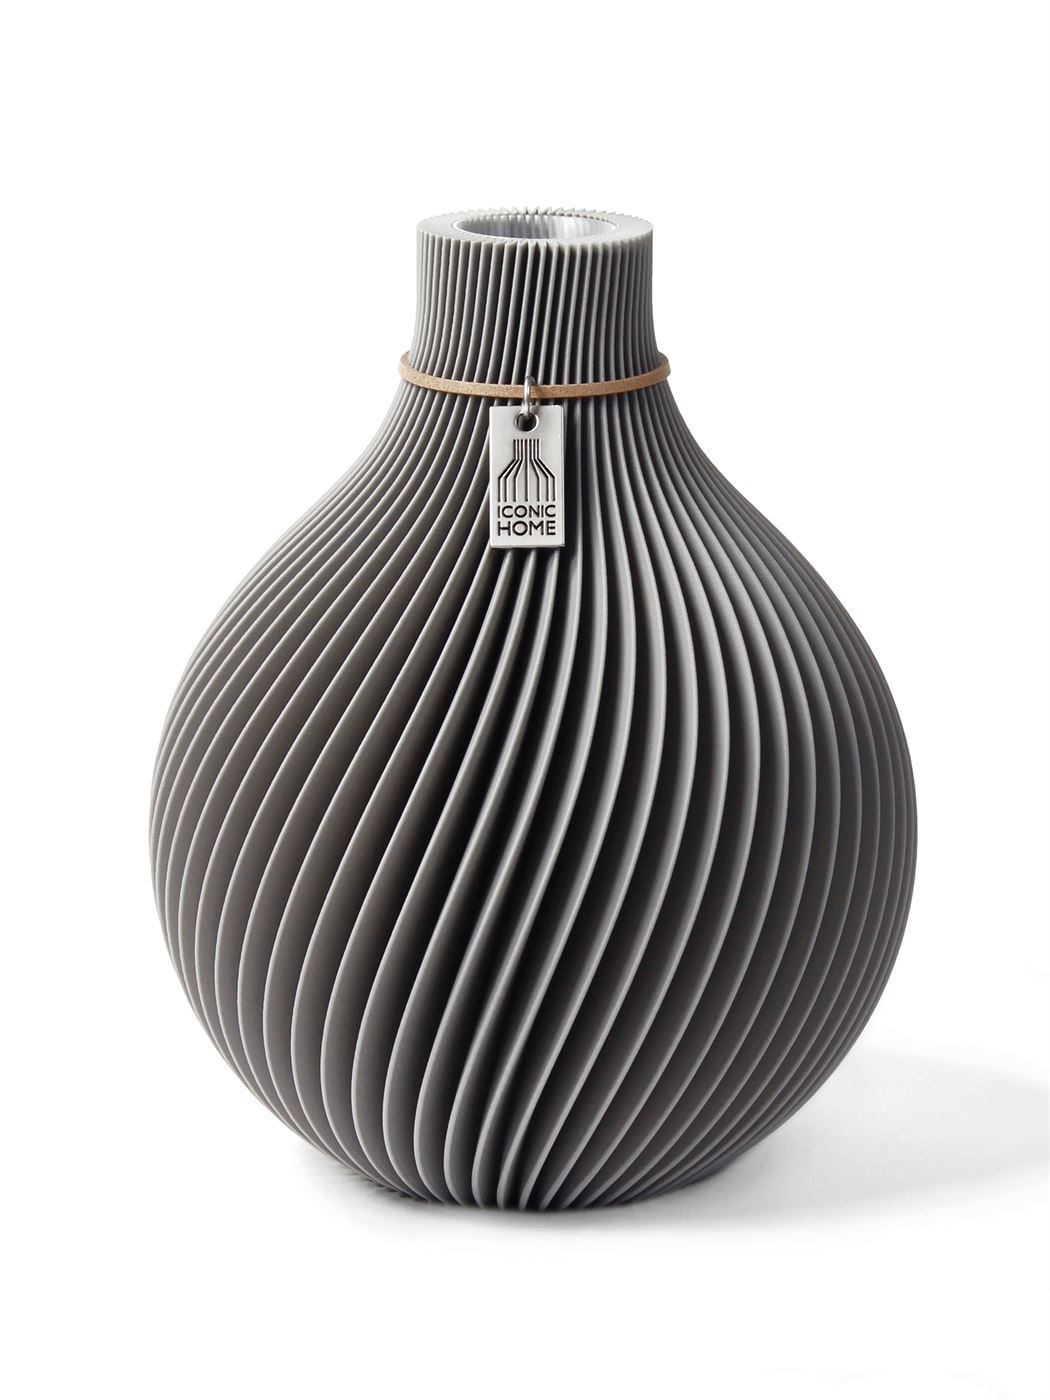 Vase Sphere Dreamy Grey Small ICONIC HOME